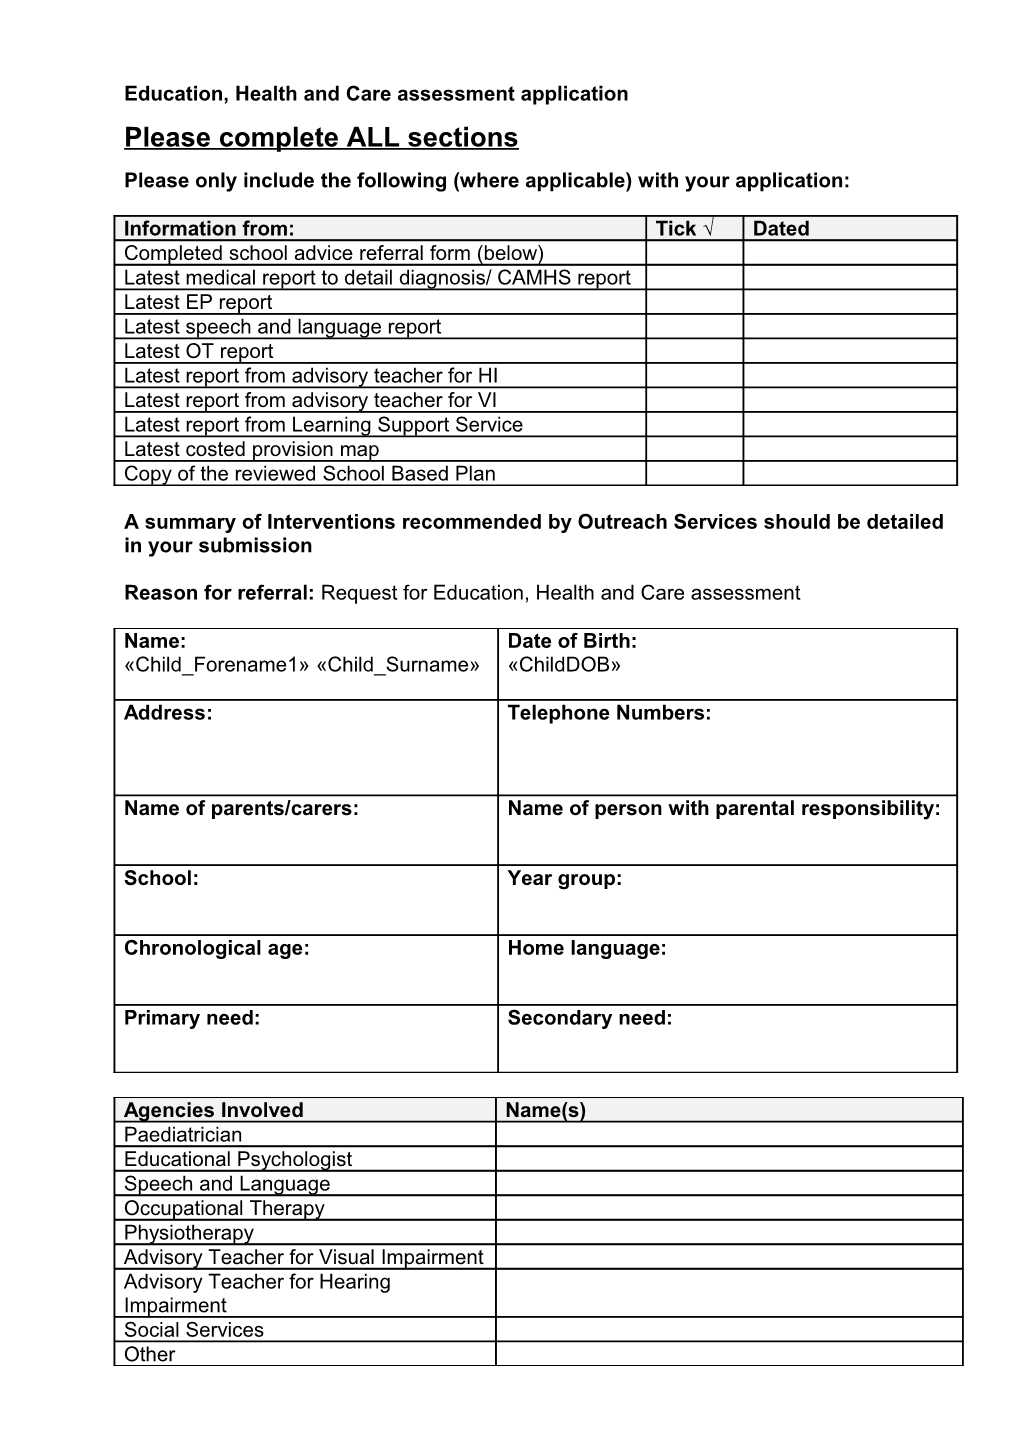 Education, Health and Care Assessment Application